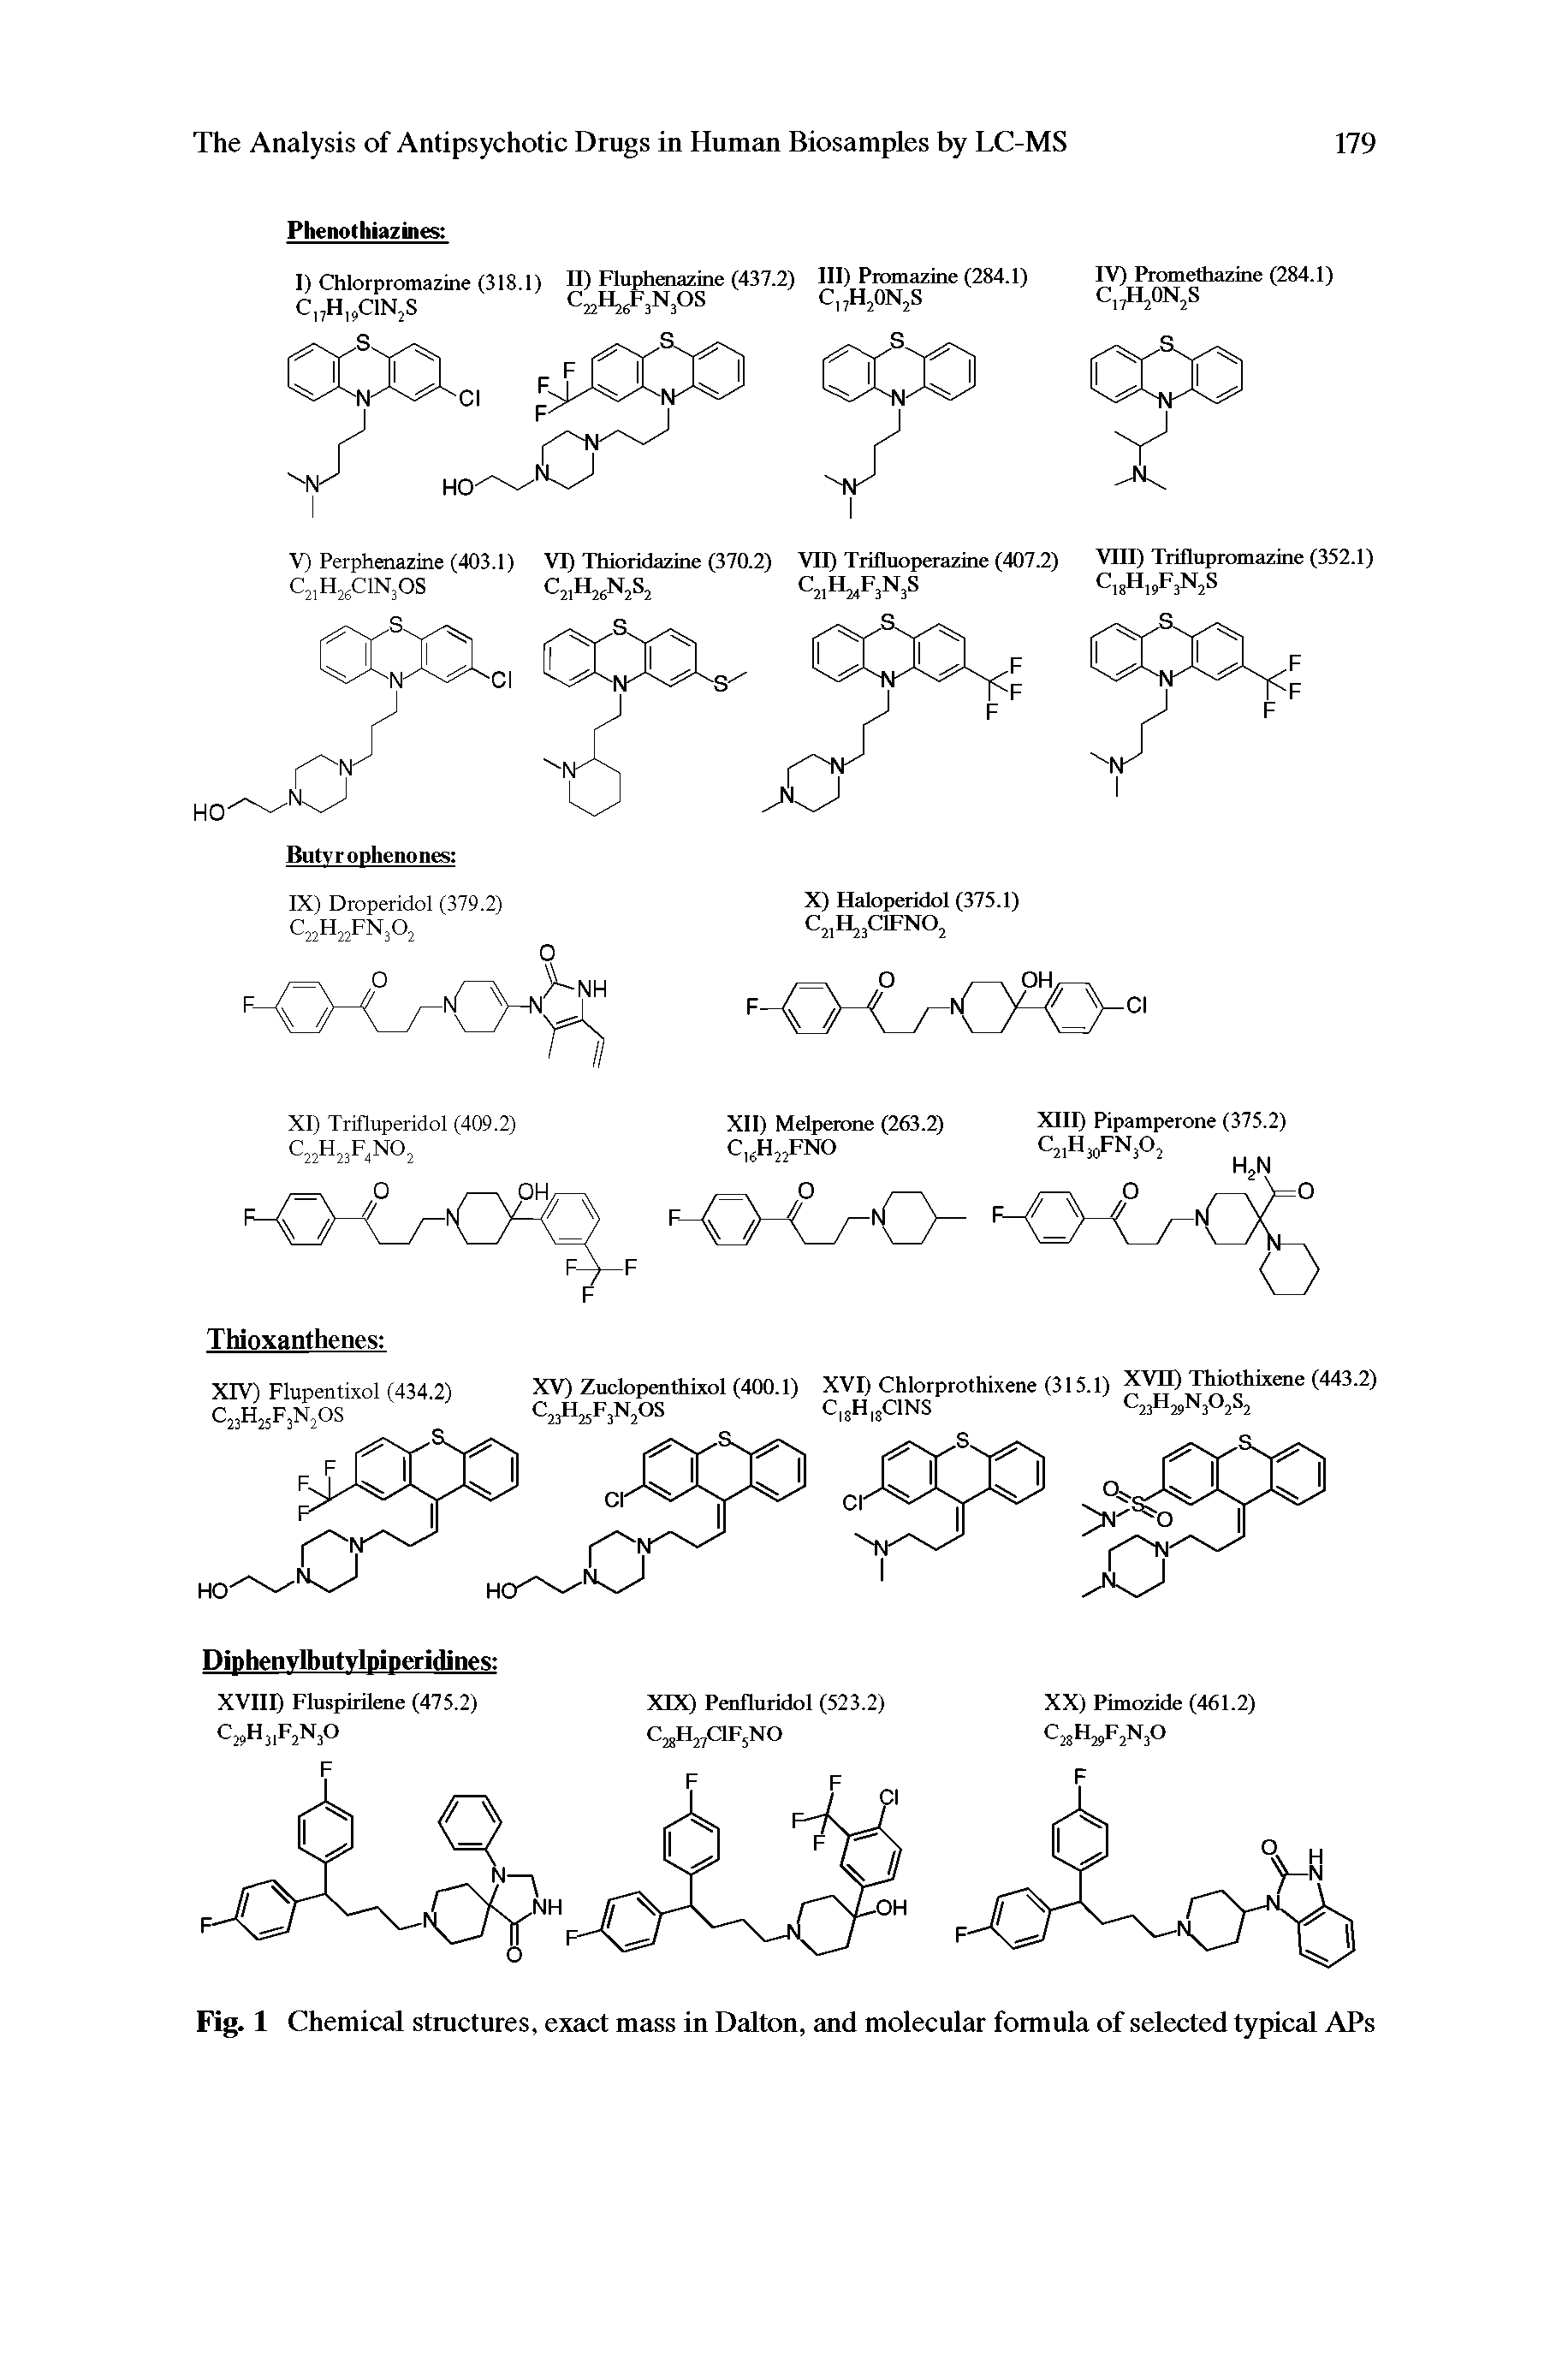 Fig. 1 Chemical structures, exact mass in Dalton, and molecular formula of selected typical APs...